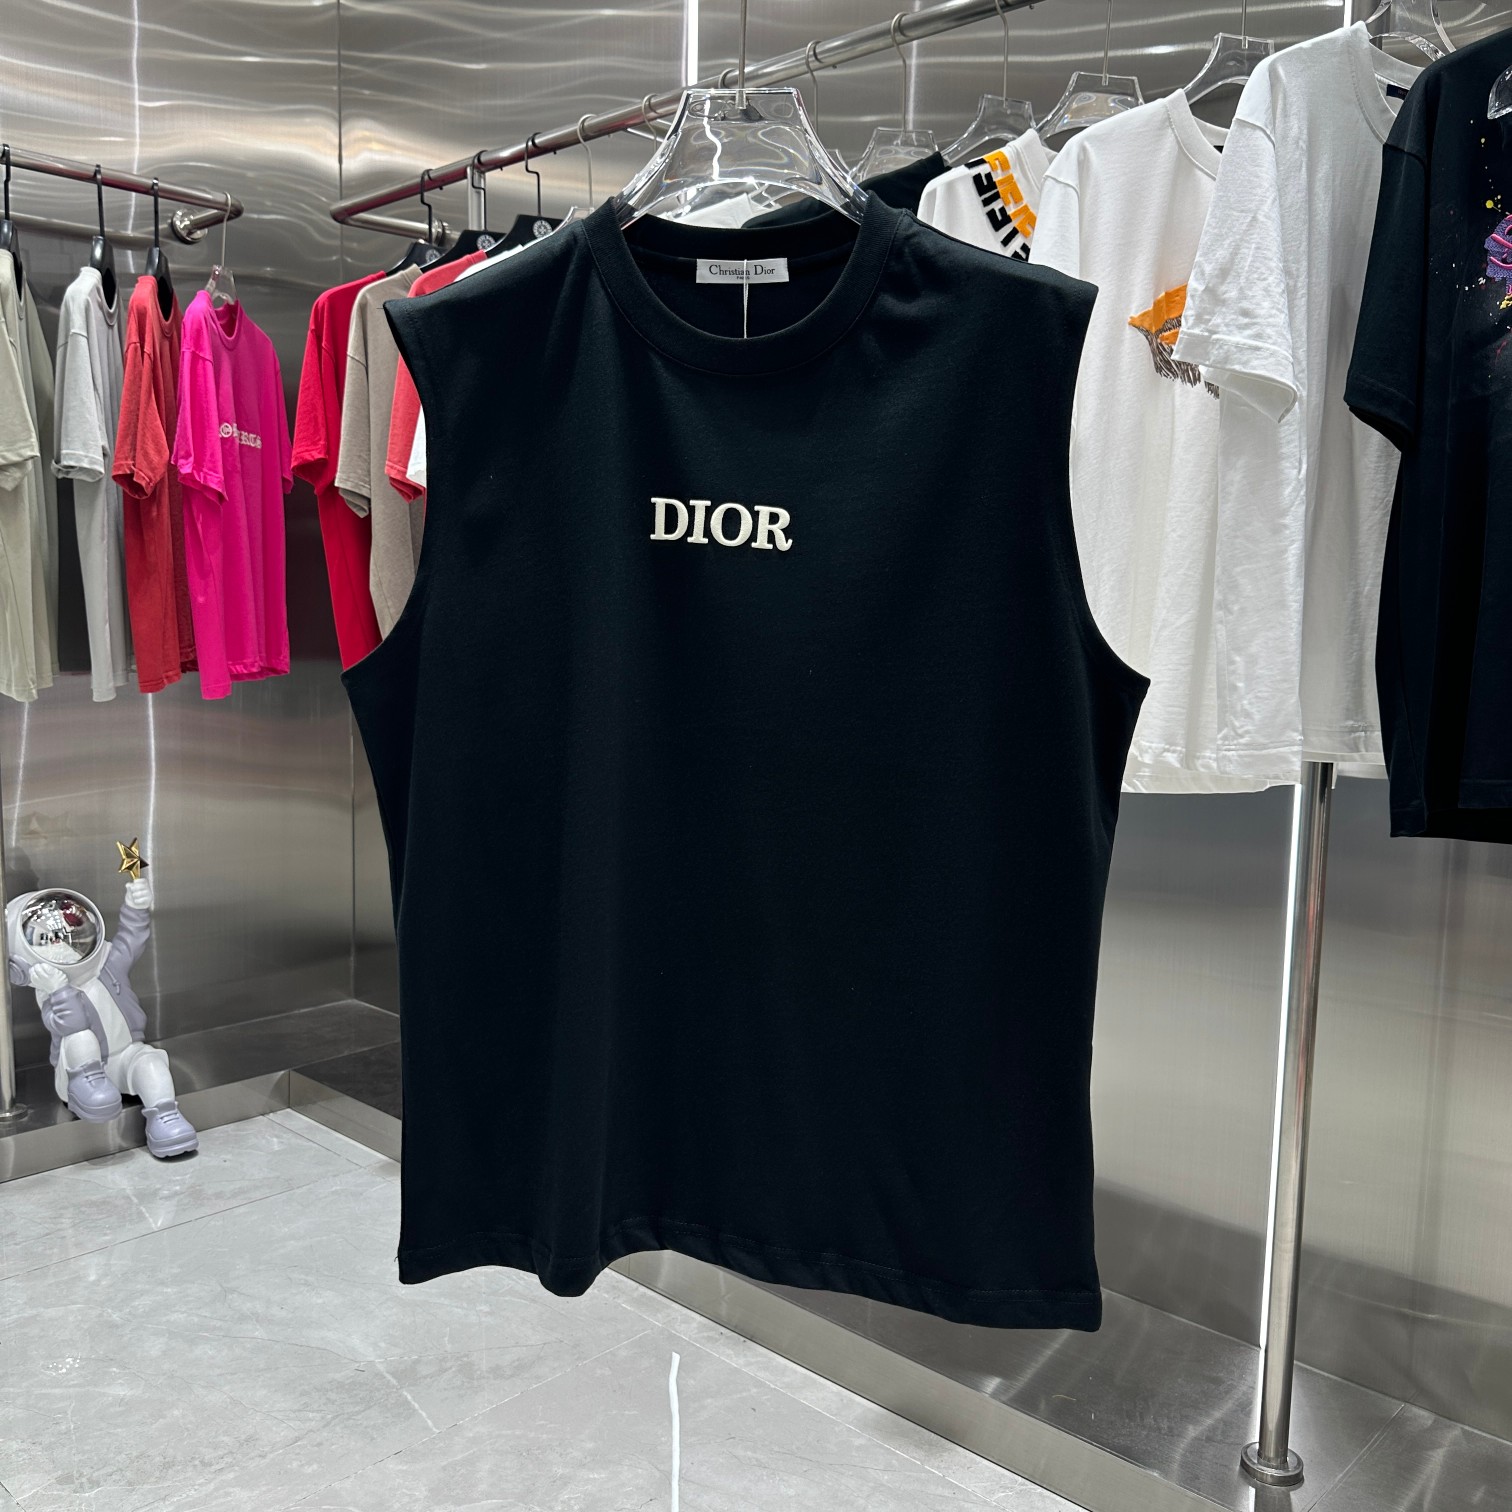 Dior Clothing Tank Tops&Camis Black White Unisex Spring Collection